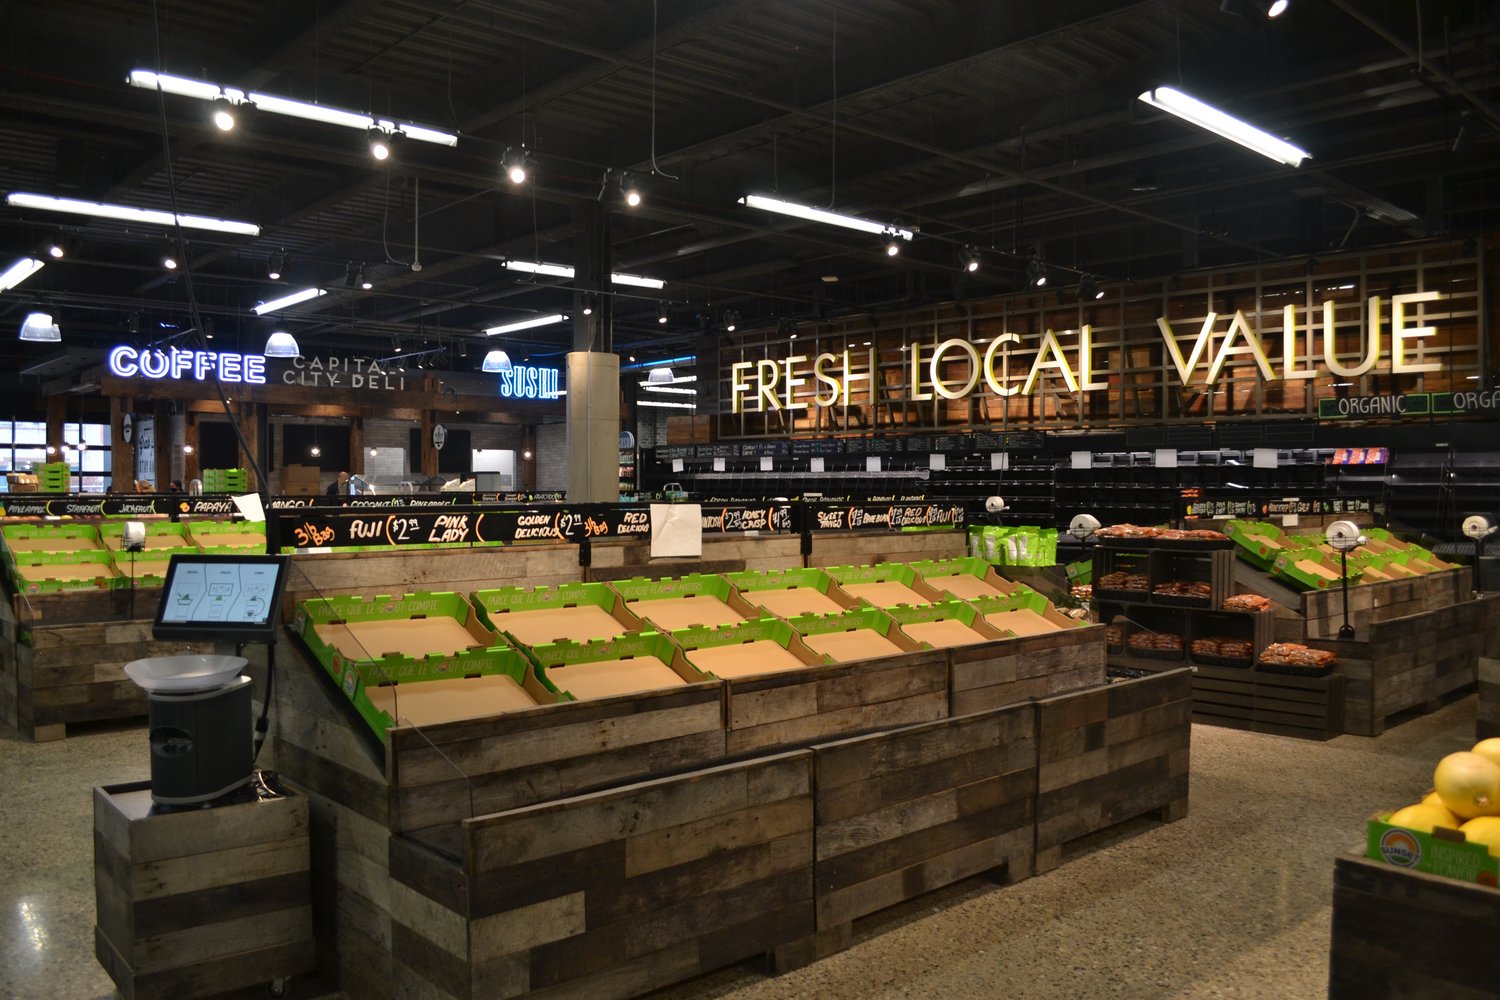 The produce section of Capital City Market.